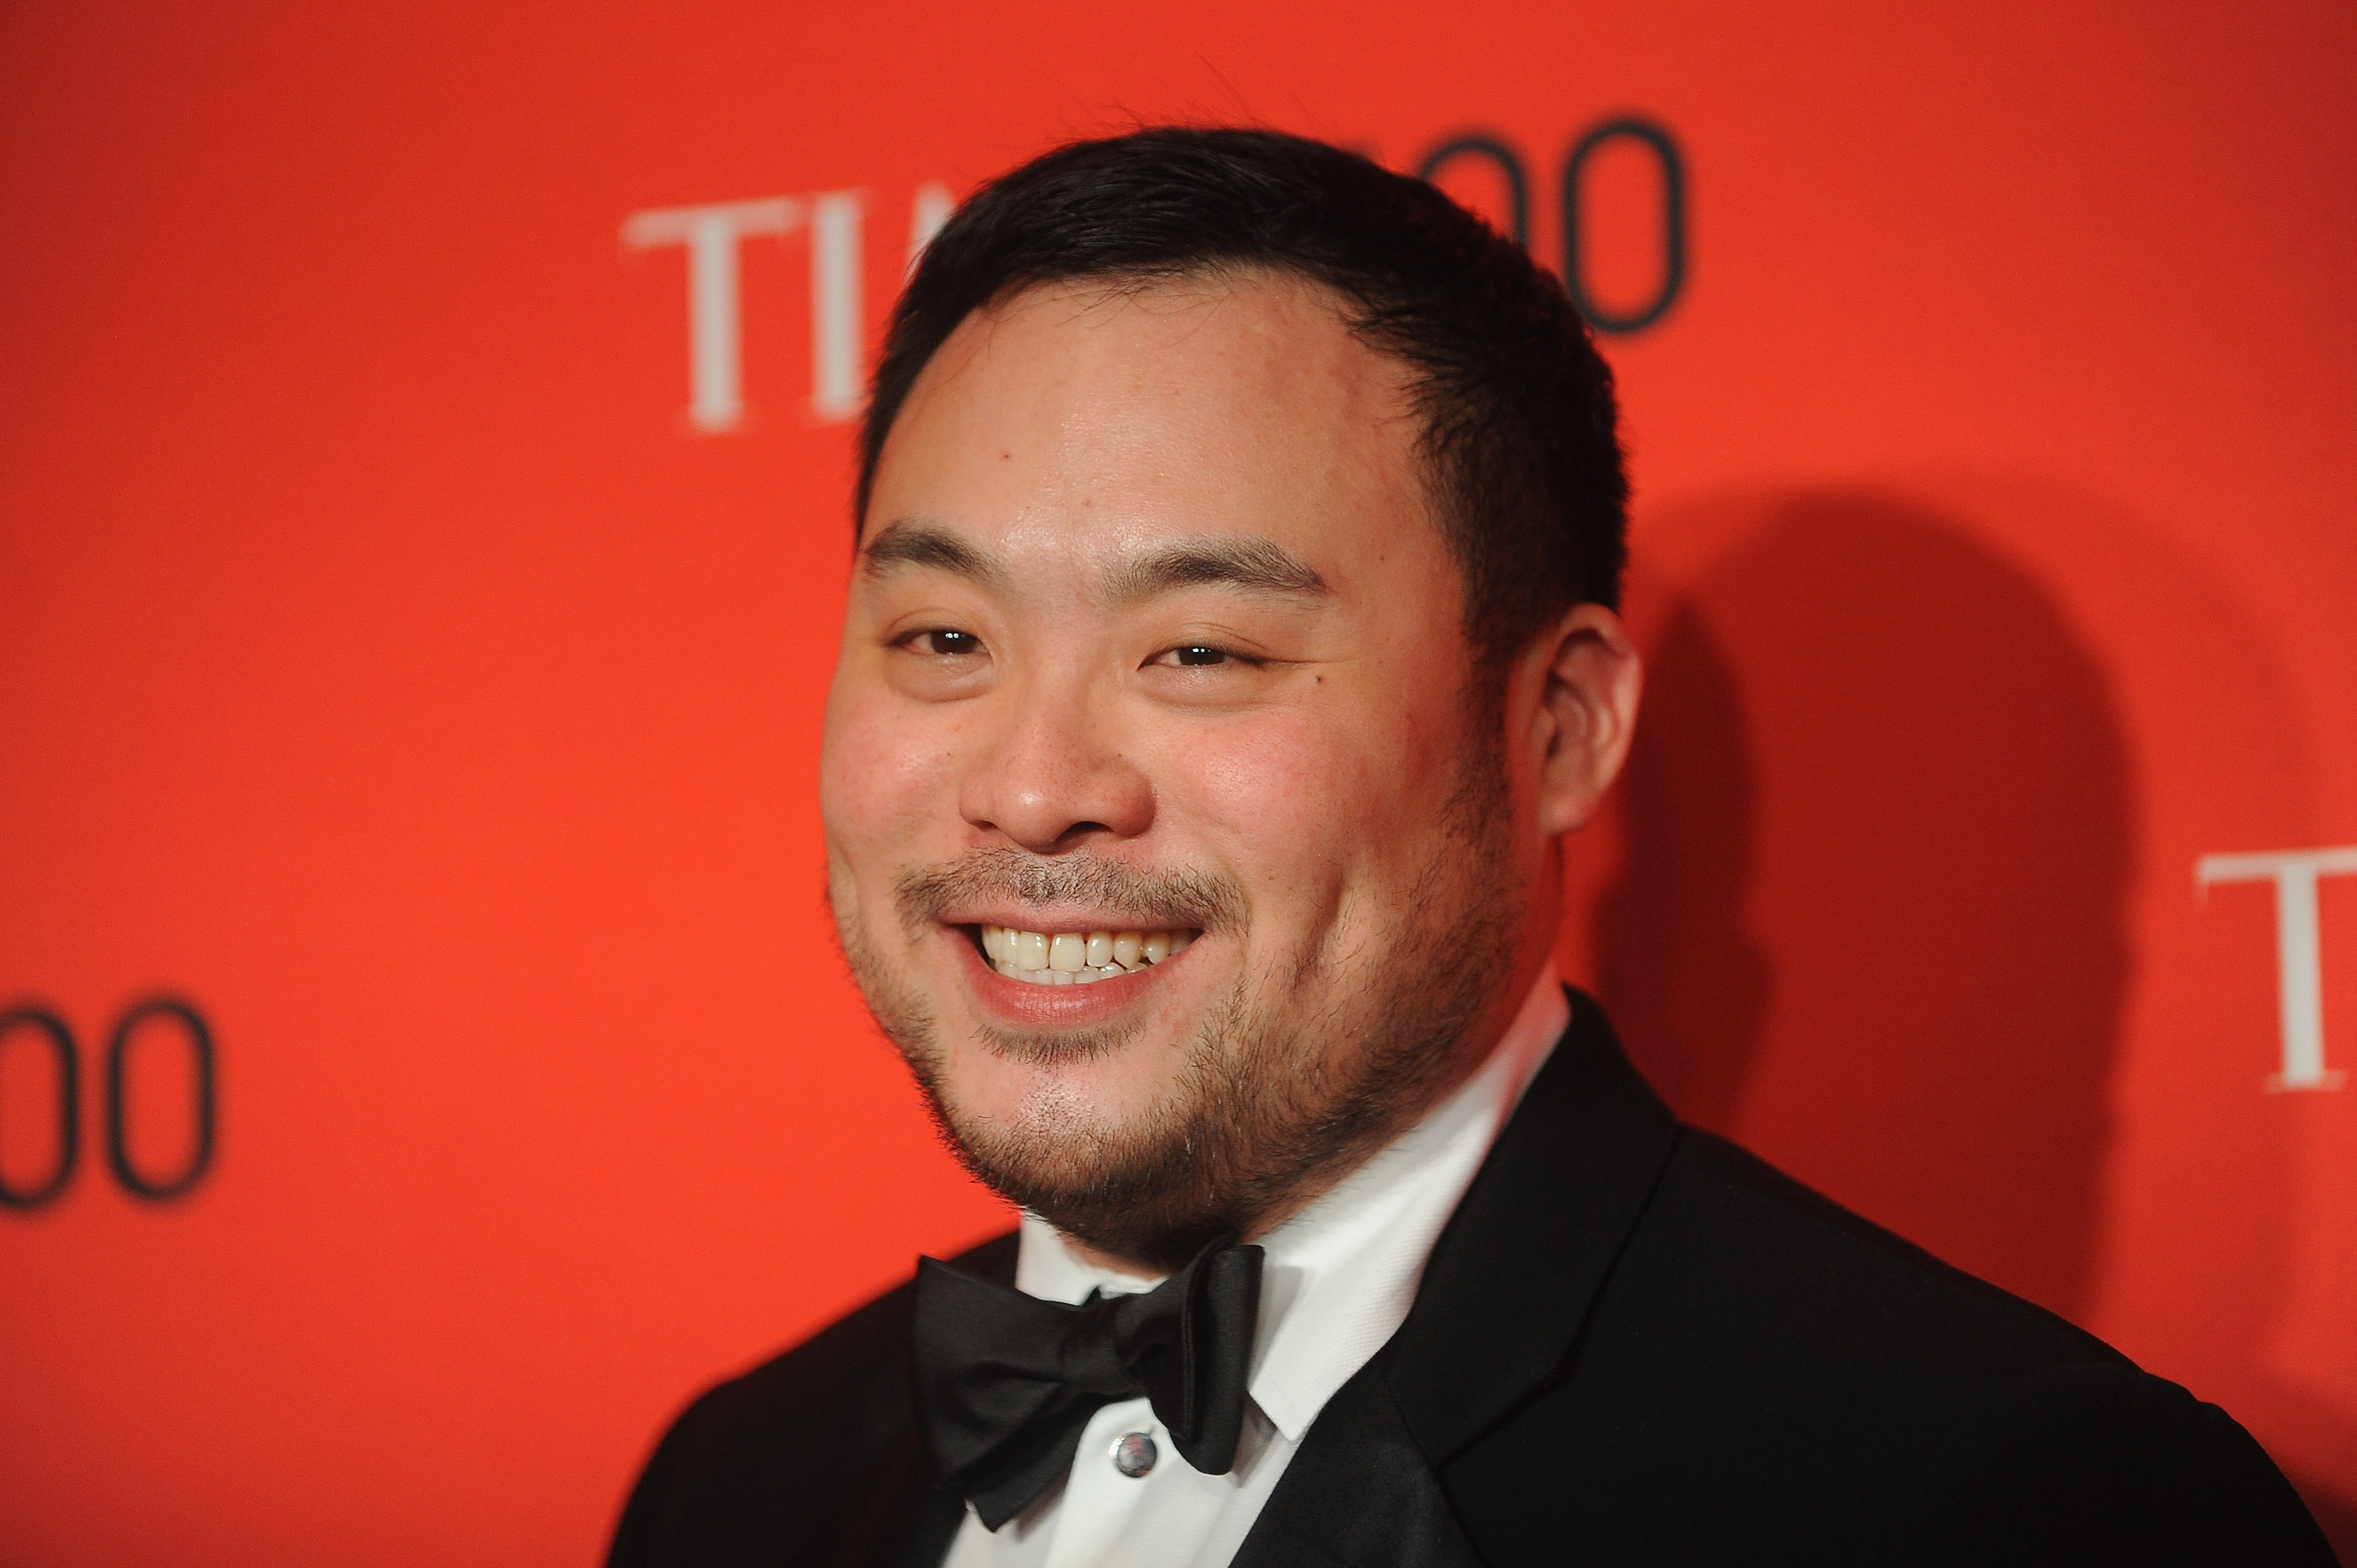 David Chang at the TIME 100 Gala celebrating TIME'S 100 Most Influential People In The World in New York City on April 24, 2012. (Fernando Leon—Getty Images)